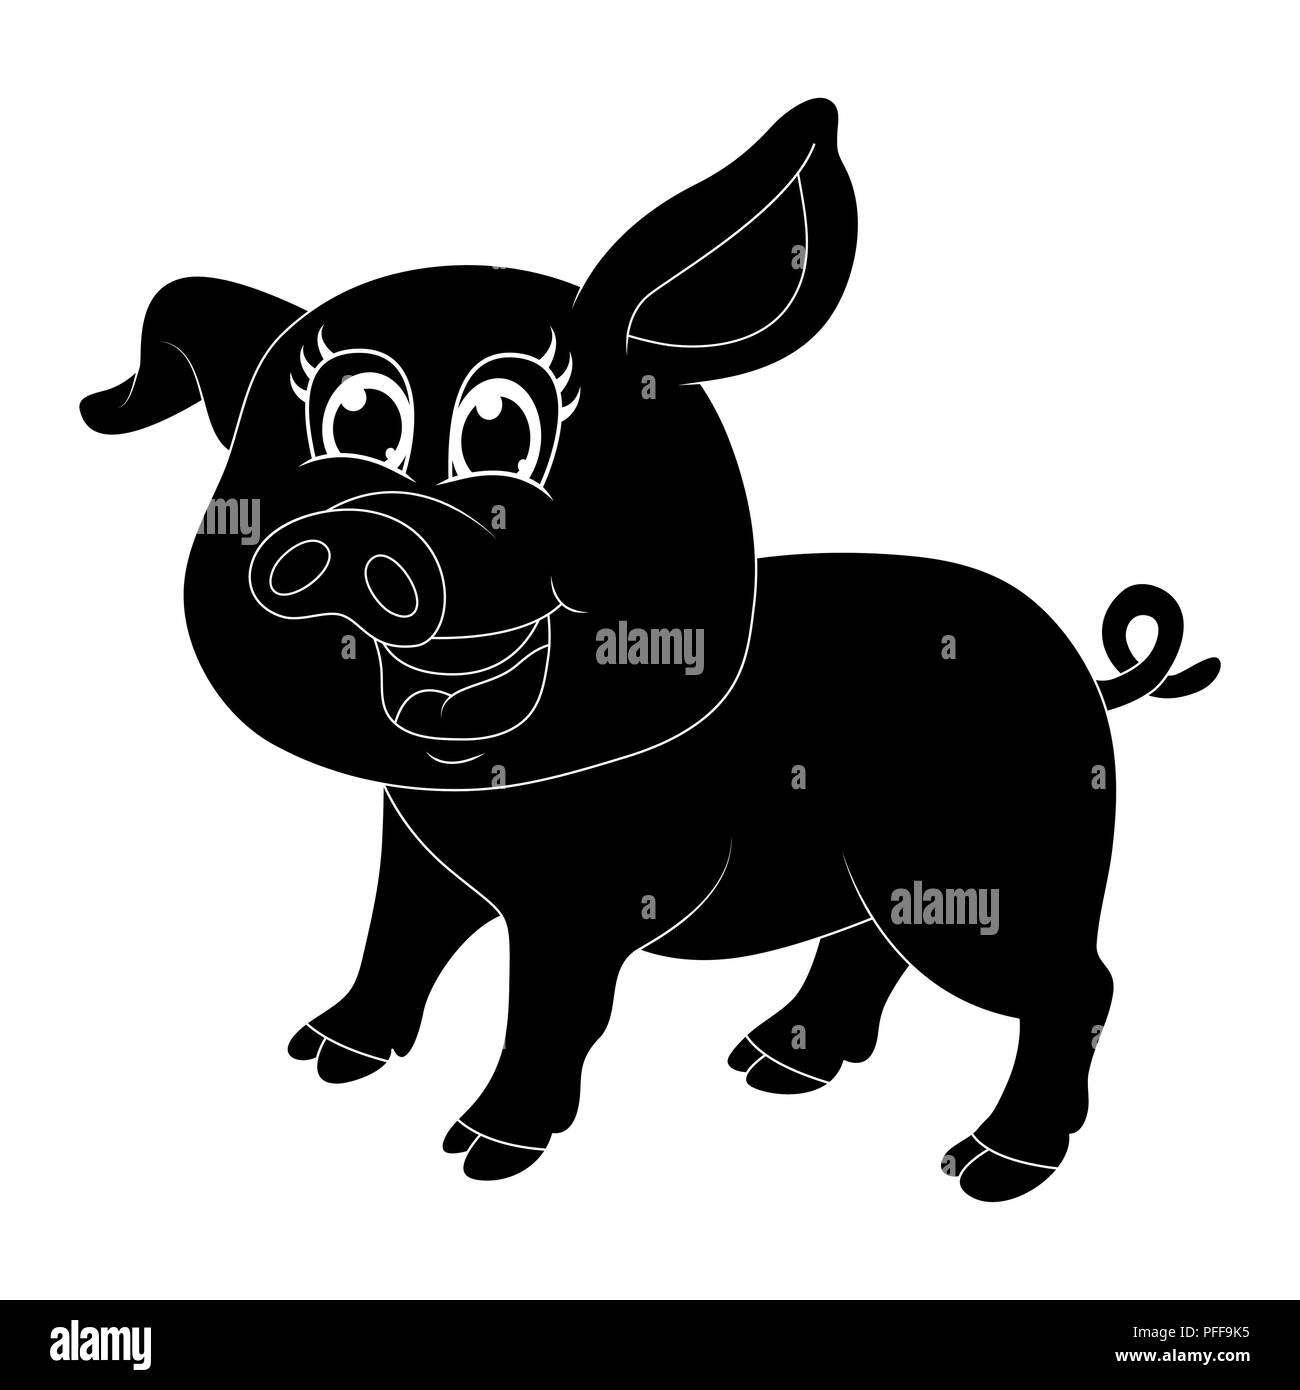 pig cartoon character vector design isolated on white background Stock Vector